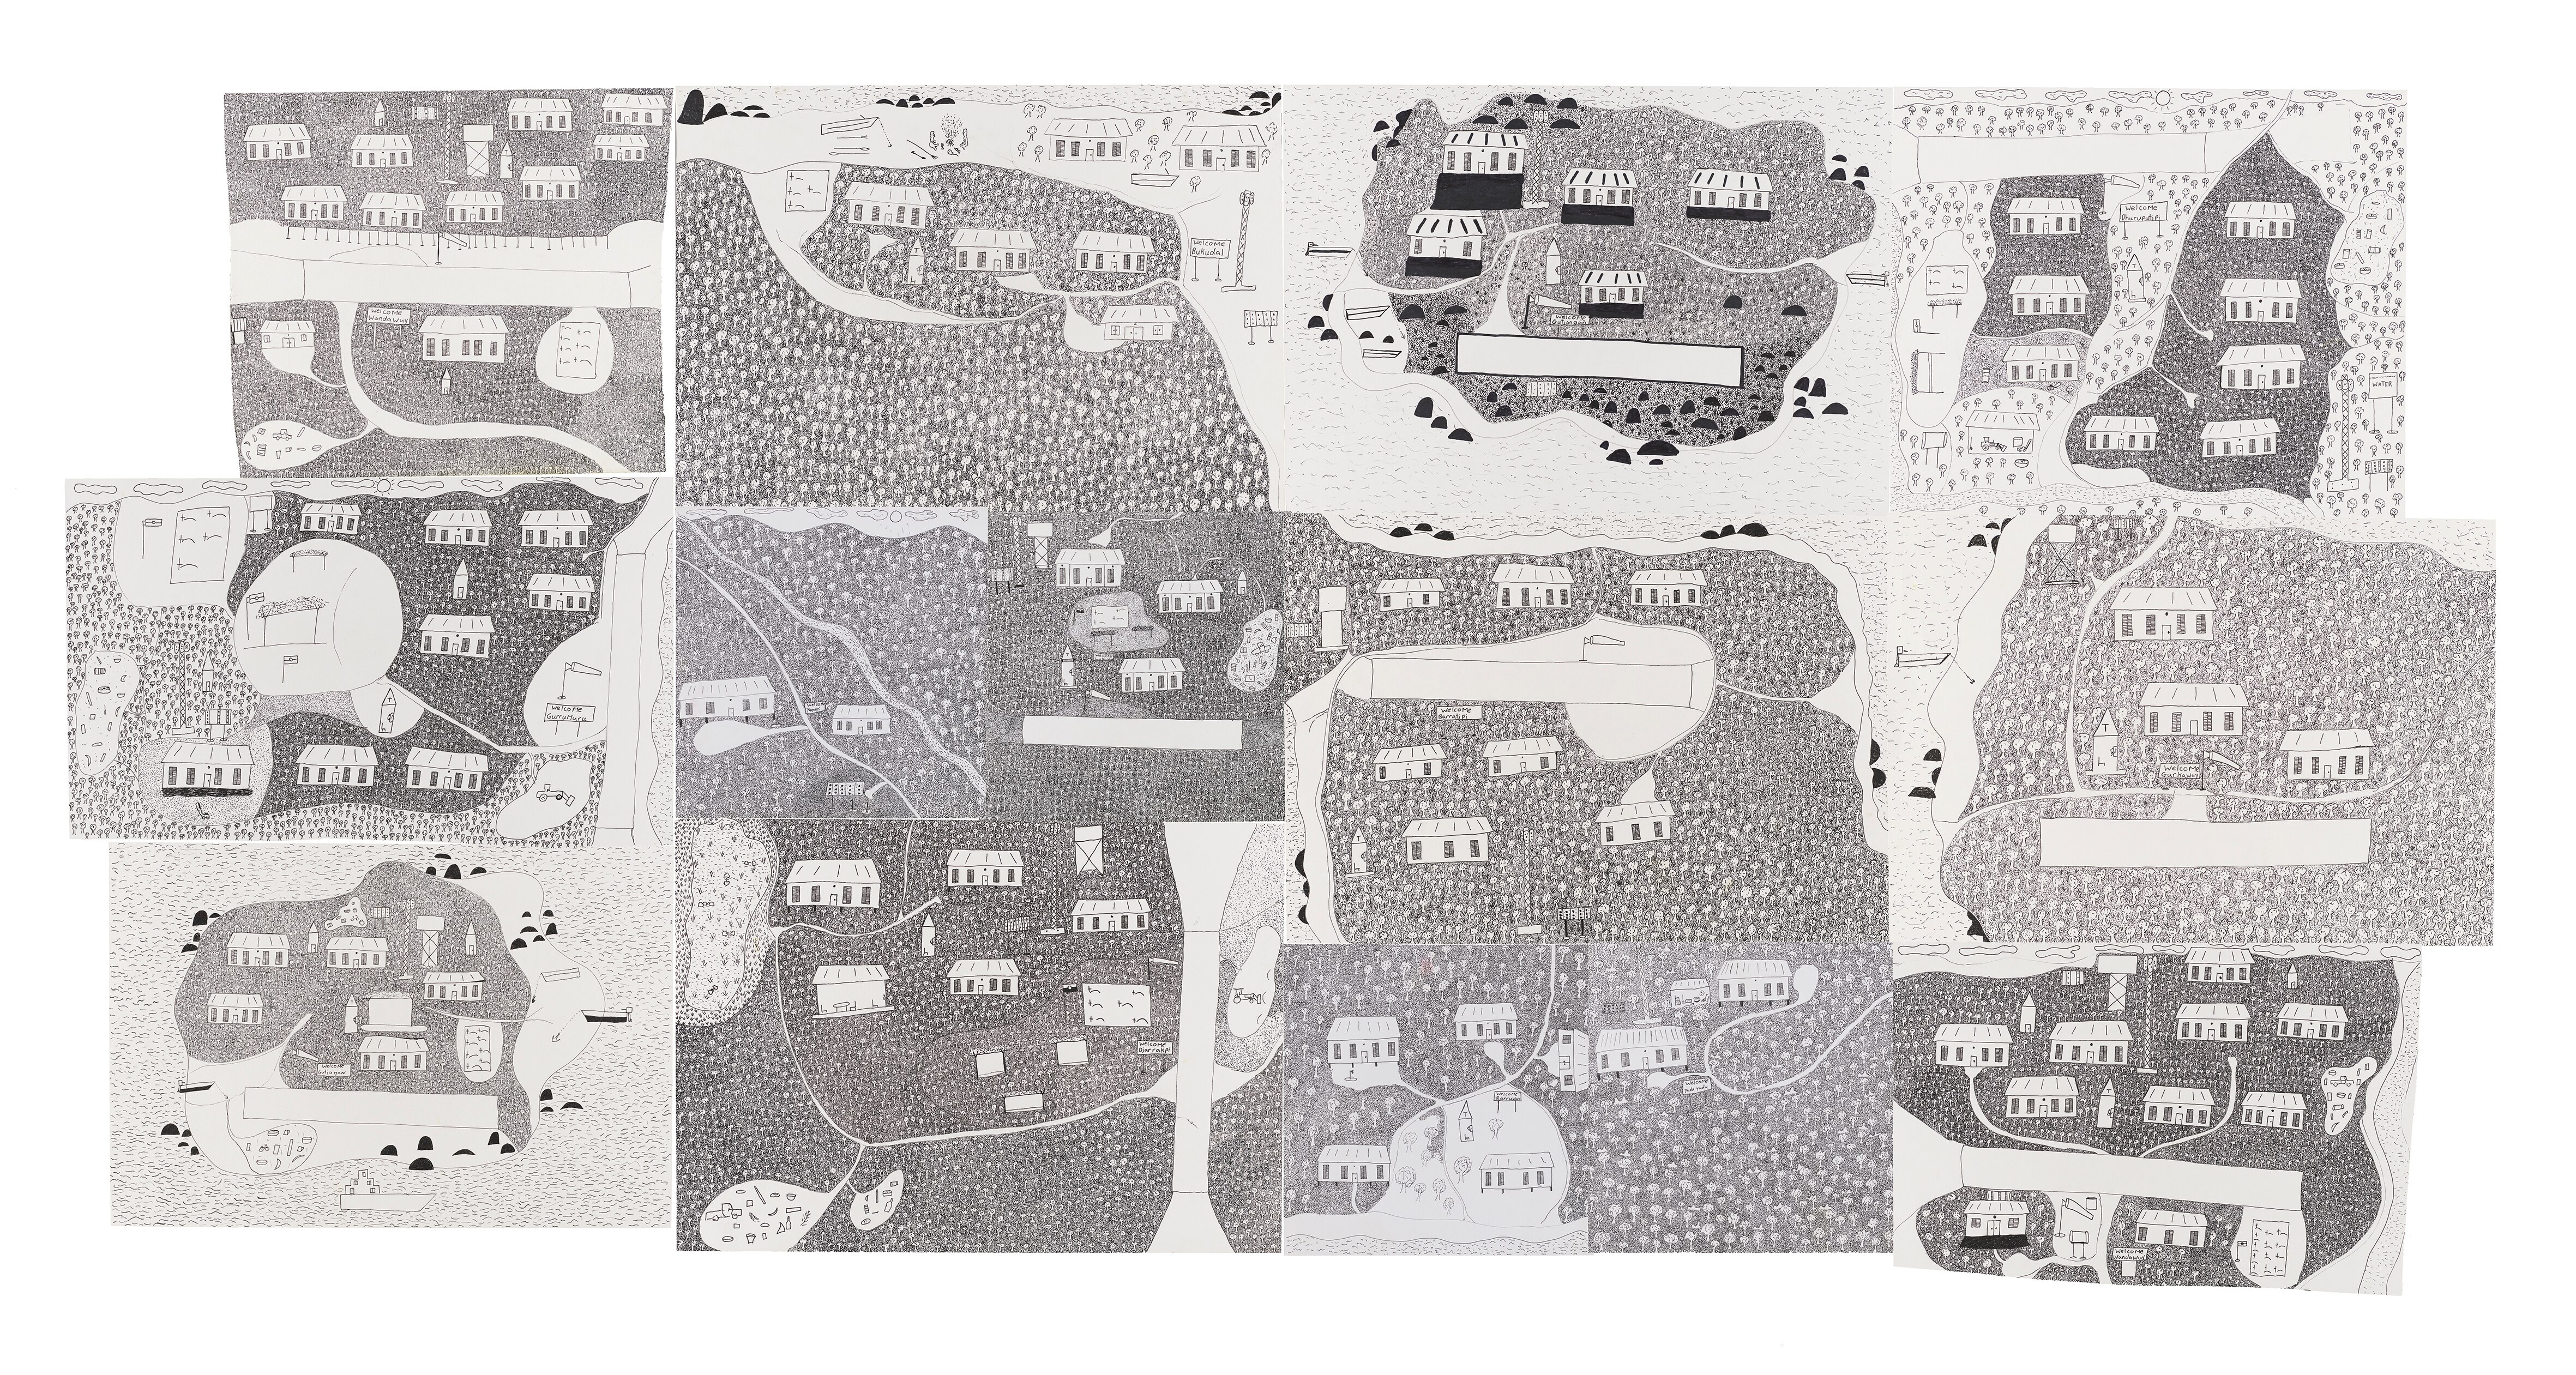 A series of drawings on paper depicting small communities